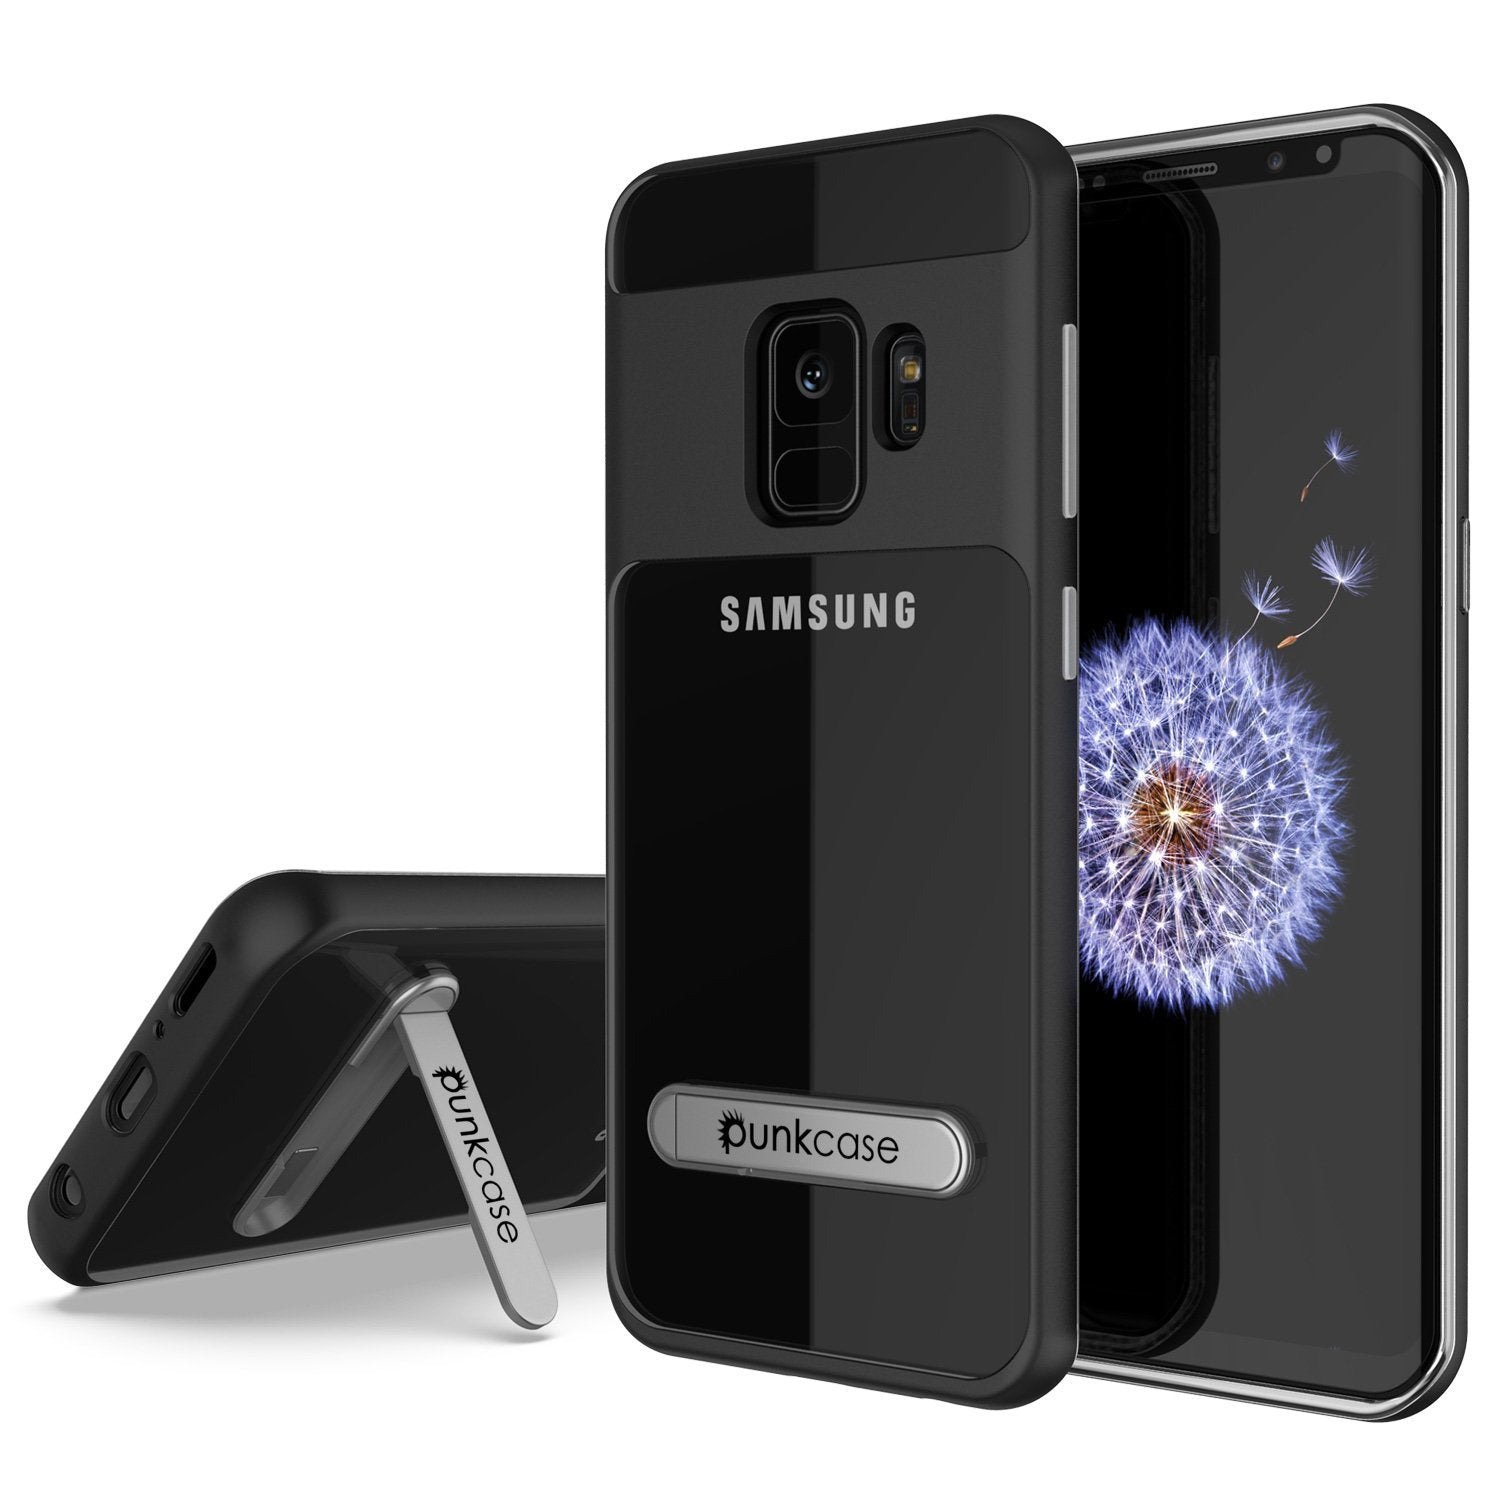 Galaxy S9 Case, PUNKcase [LUCID 3.0 Series] [Slim Fit] [Clear Back] Armor Cover w/ Integrated Kickstand, Anti-Shock System & PUNKSHIELD Screen Protector for Samsung Galaxy S9 [Black]